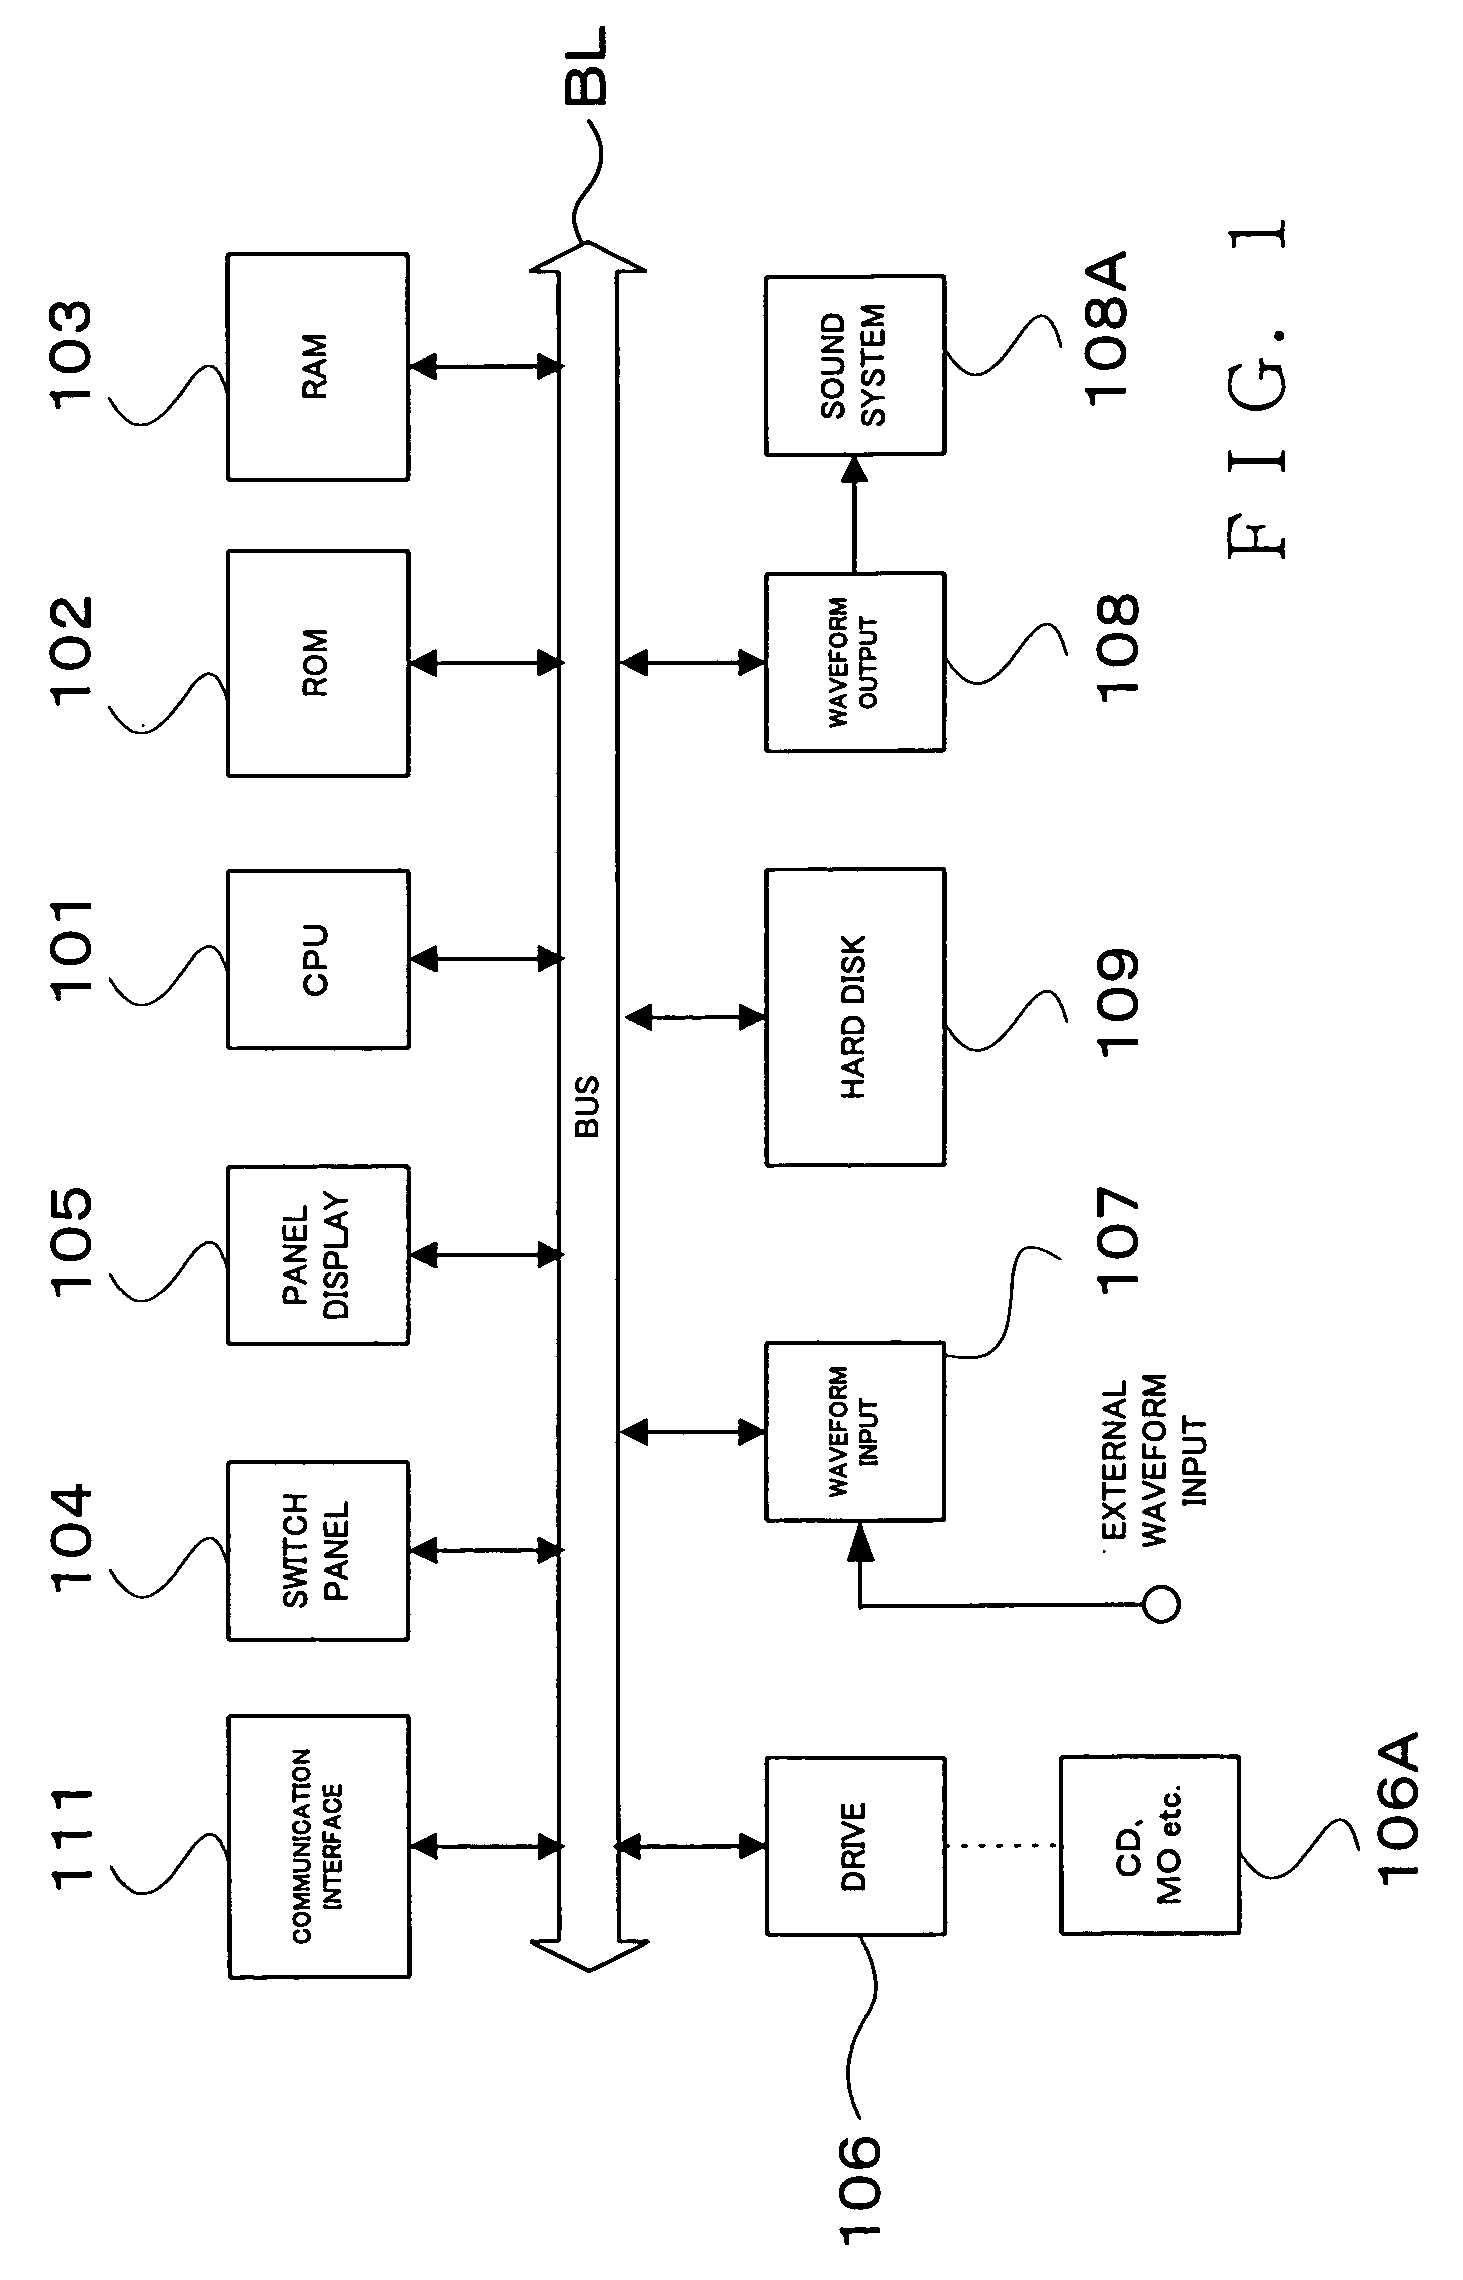 Method and apparatus for producing a waveform corresponding to a style of rendition using a packet stream